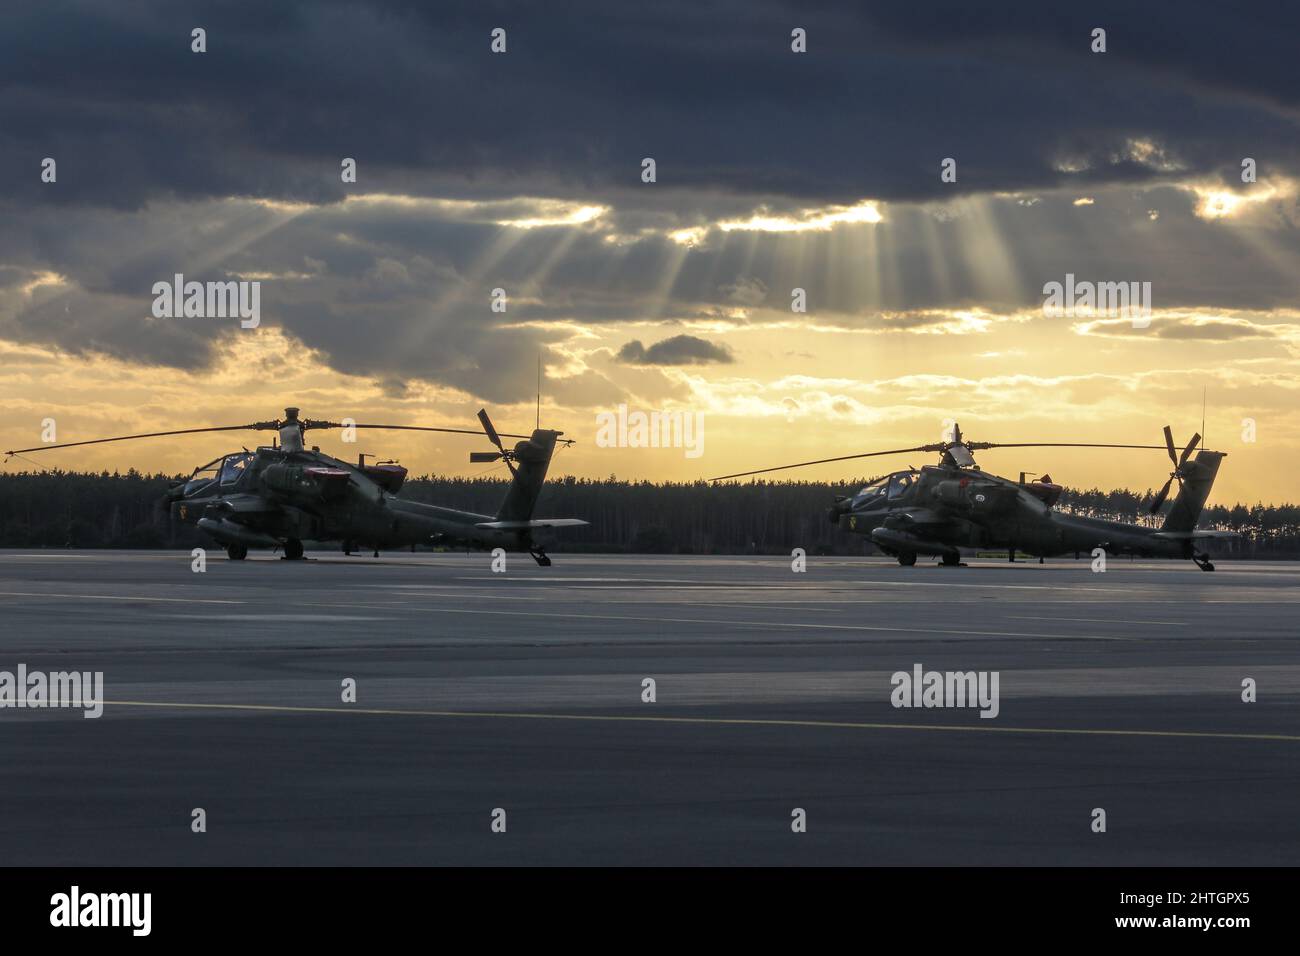 Lask, Poland. 25 February, 2022. U.S. Army AH64 Apache attack helicopters with the 7th Squadron, 17th Cavalry Regiment of the 1st Air Cavalry Brigade on the ramp at Lask Air Base, February 25, 2022 in Lask, Poland. The U.S. has increased NATO forces in the region to counter the Russia threat against Ukraine.  Credit: Sgt. Agustín Montanez/U.S Army/Alamy Live News Stock Photo